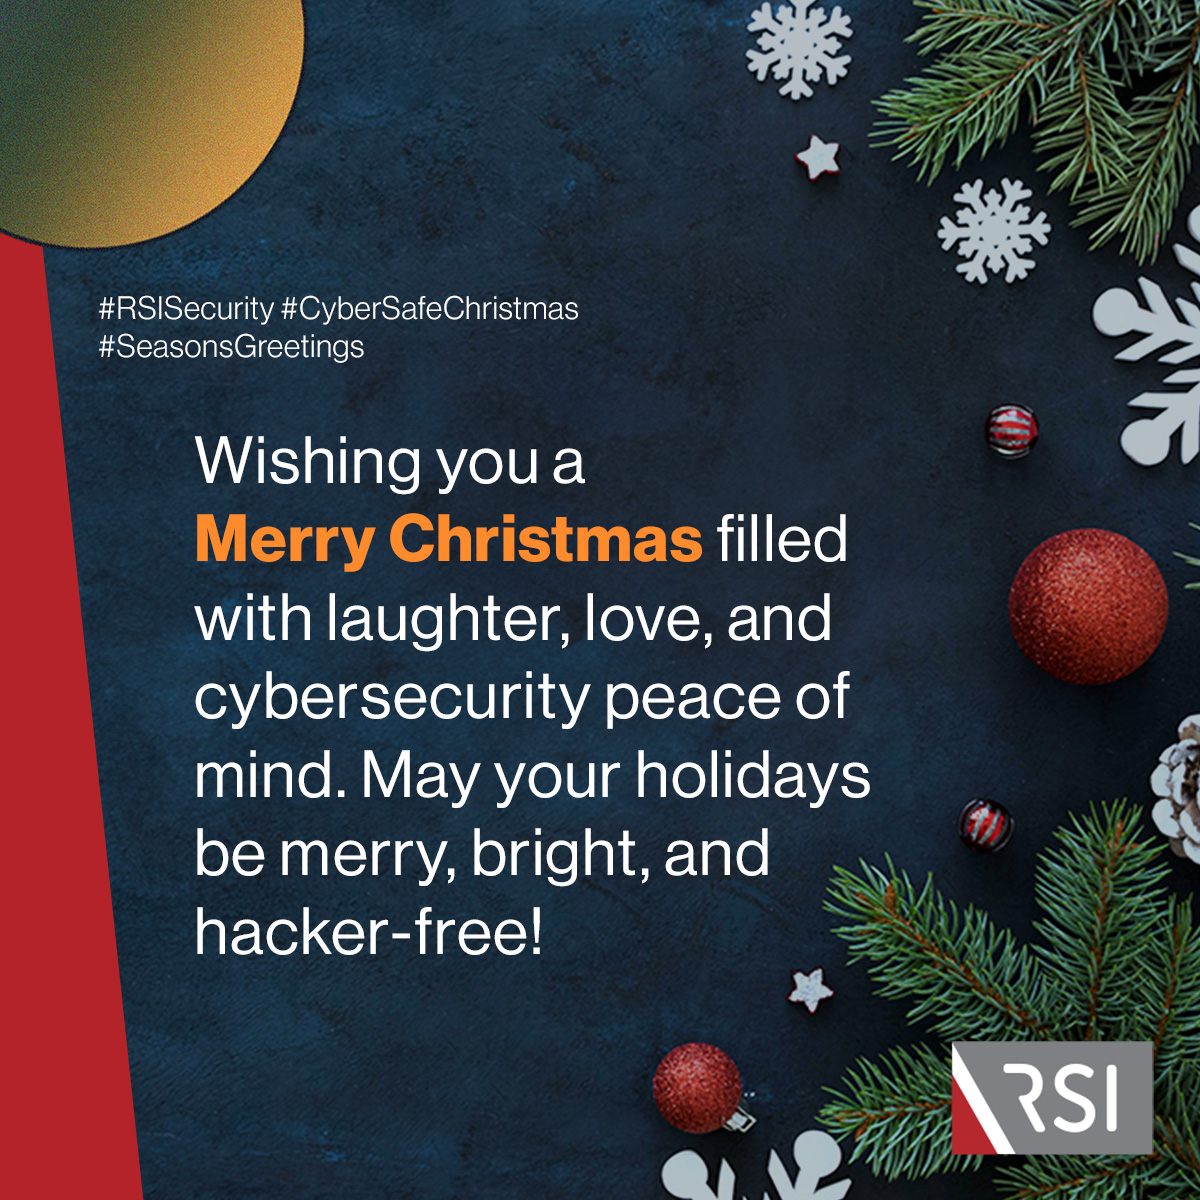 Happy holidays to all the cyberwarriors out there! Have a safe holiday season ☃️ #RSISecurity #CyberSafeChristmas #SeasonsGreetings